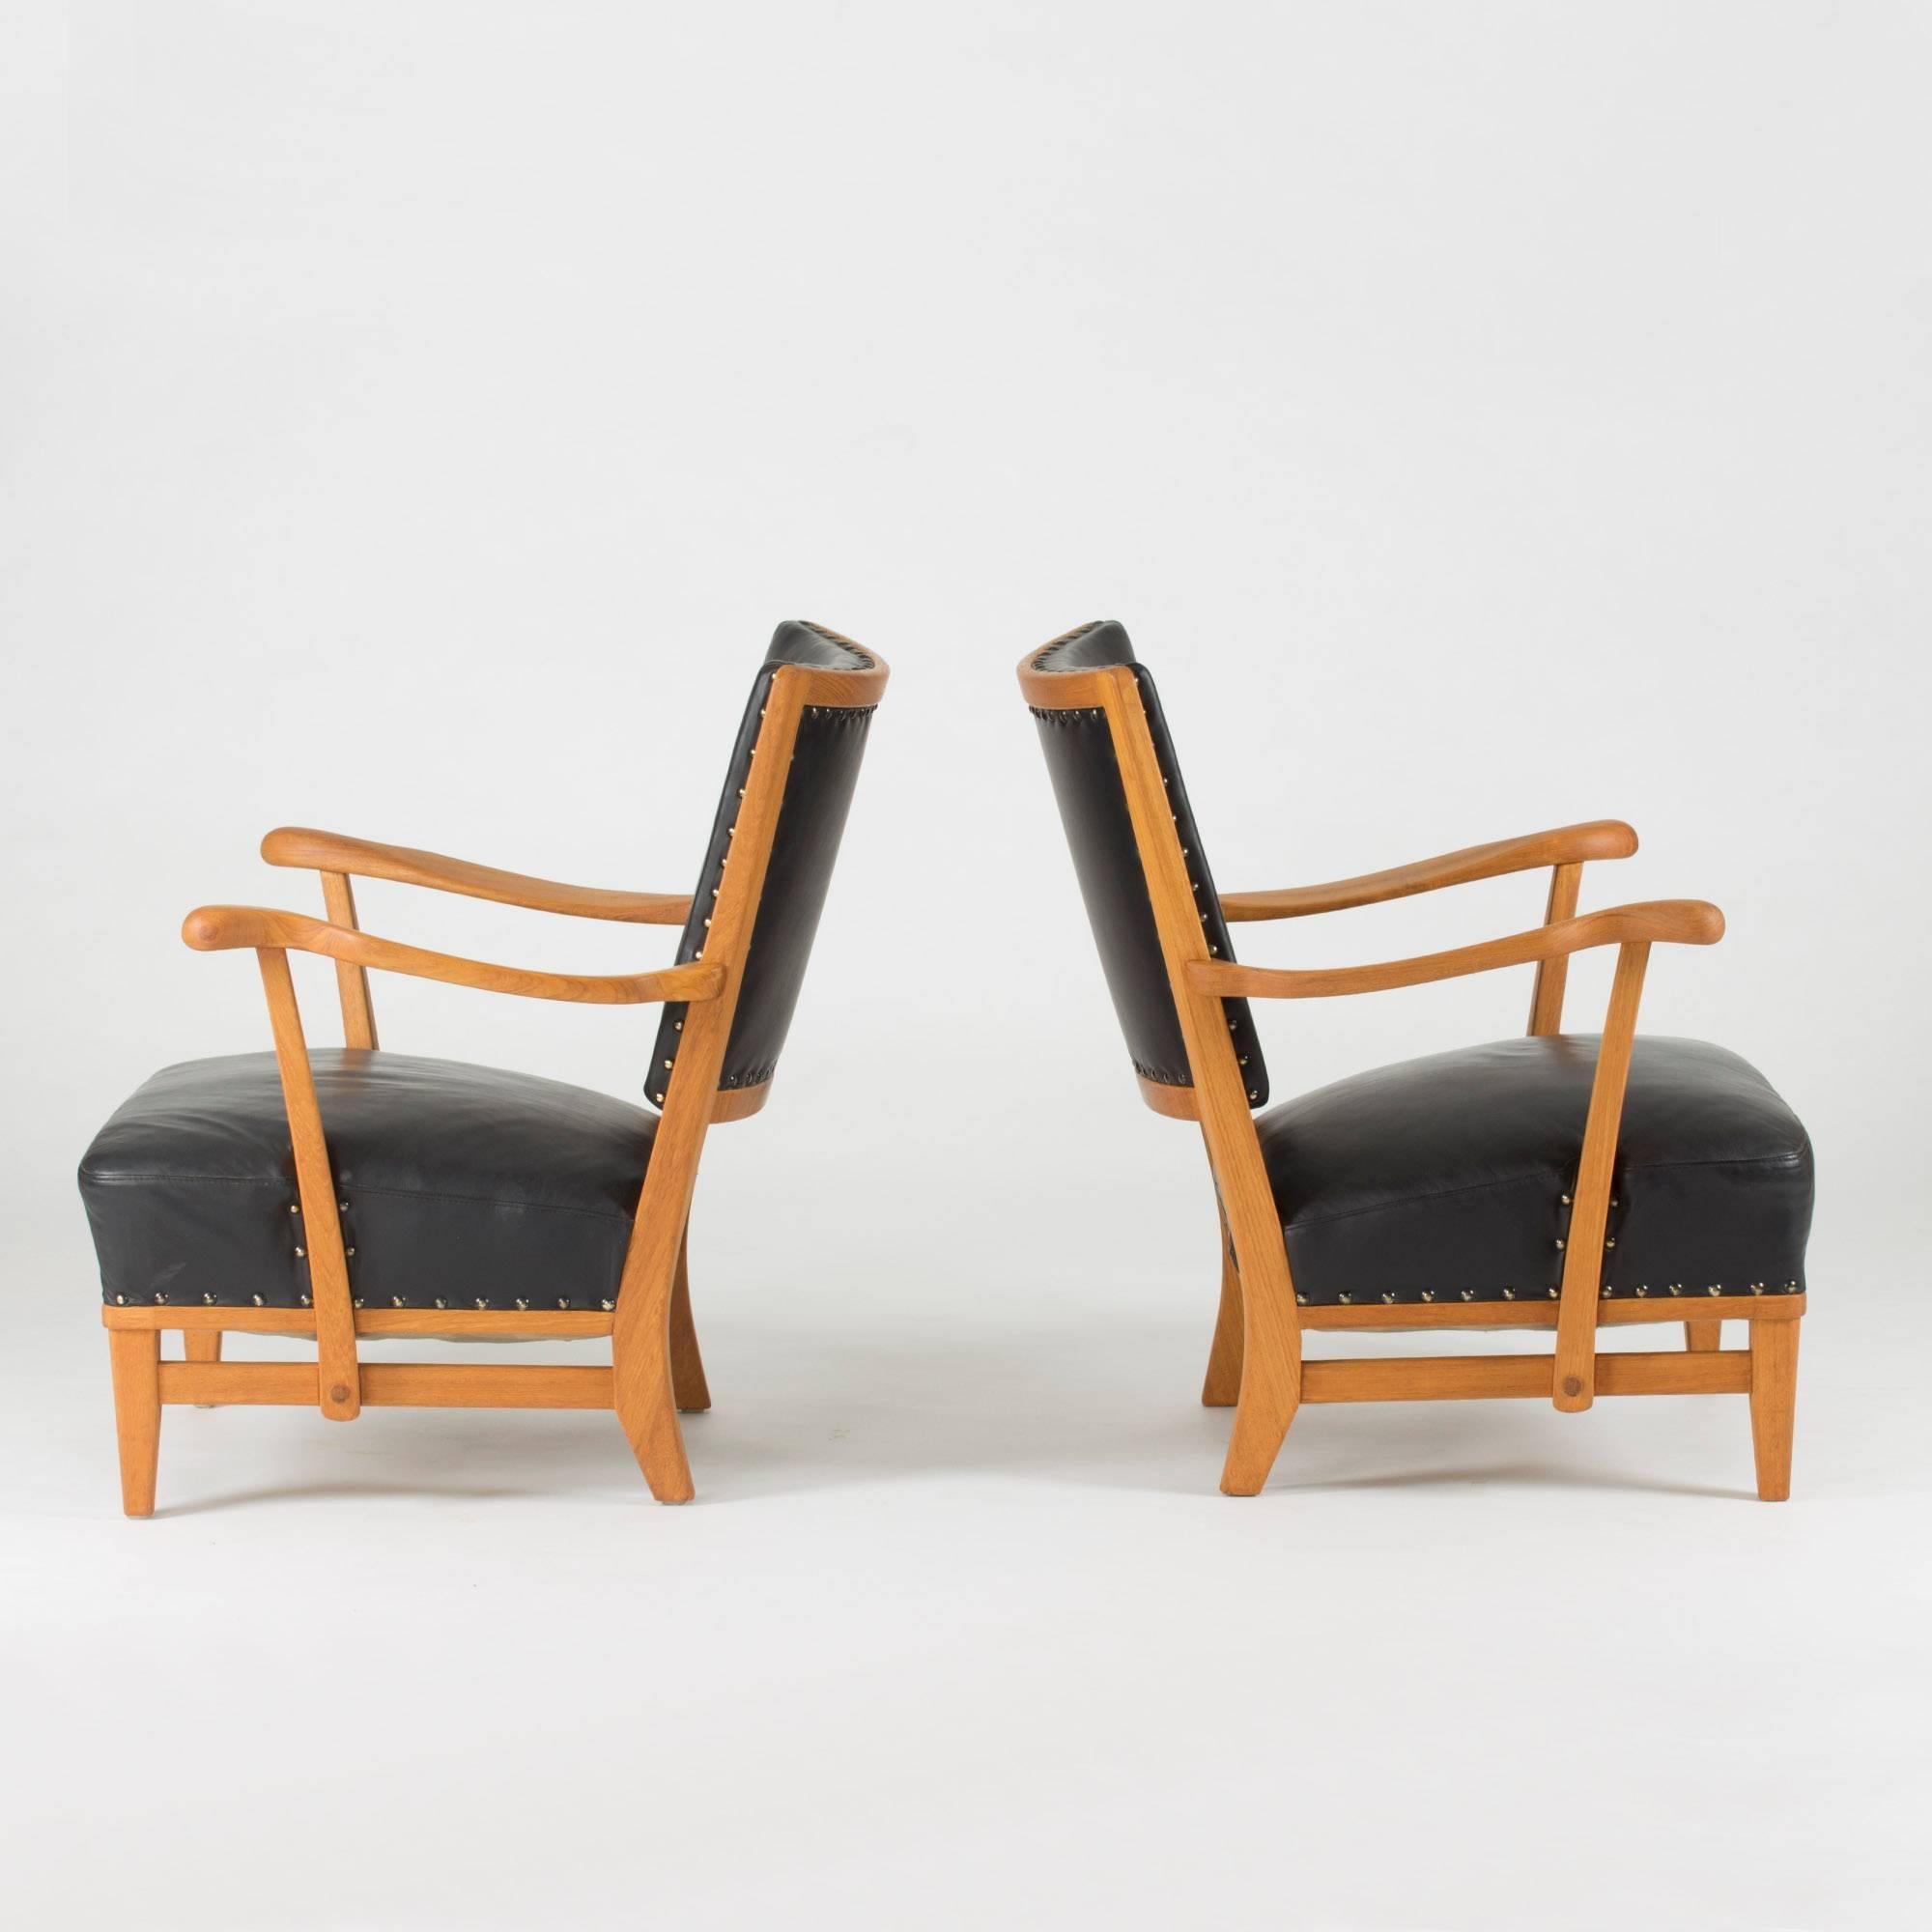 Elegant, stately lounge chairs designed by Elias Svedberg in 1939 for the interior of the cooperative housing company HSB’s headquarters. Masterfully executed by hand at HSB: Own workshop, Sparreholms Snickerifabrik. Made from mahogany with